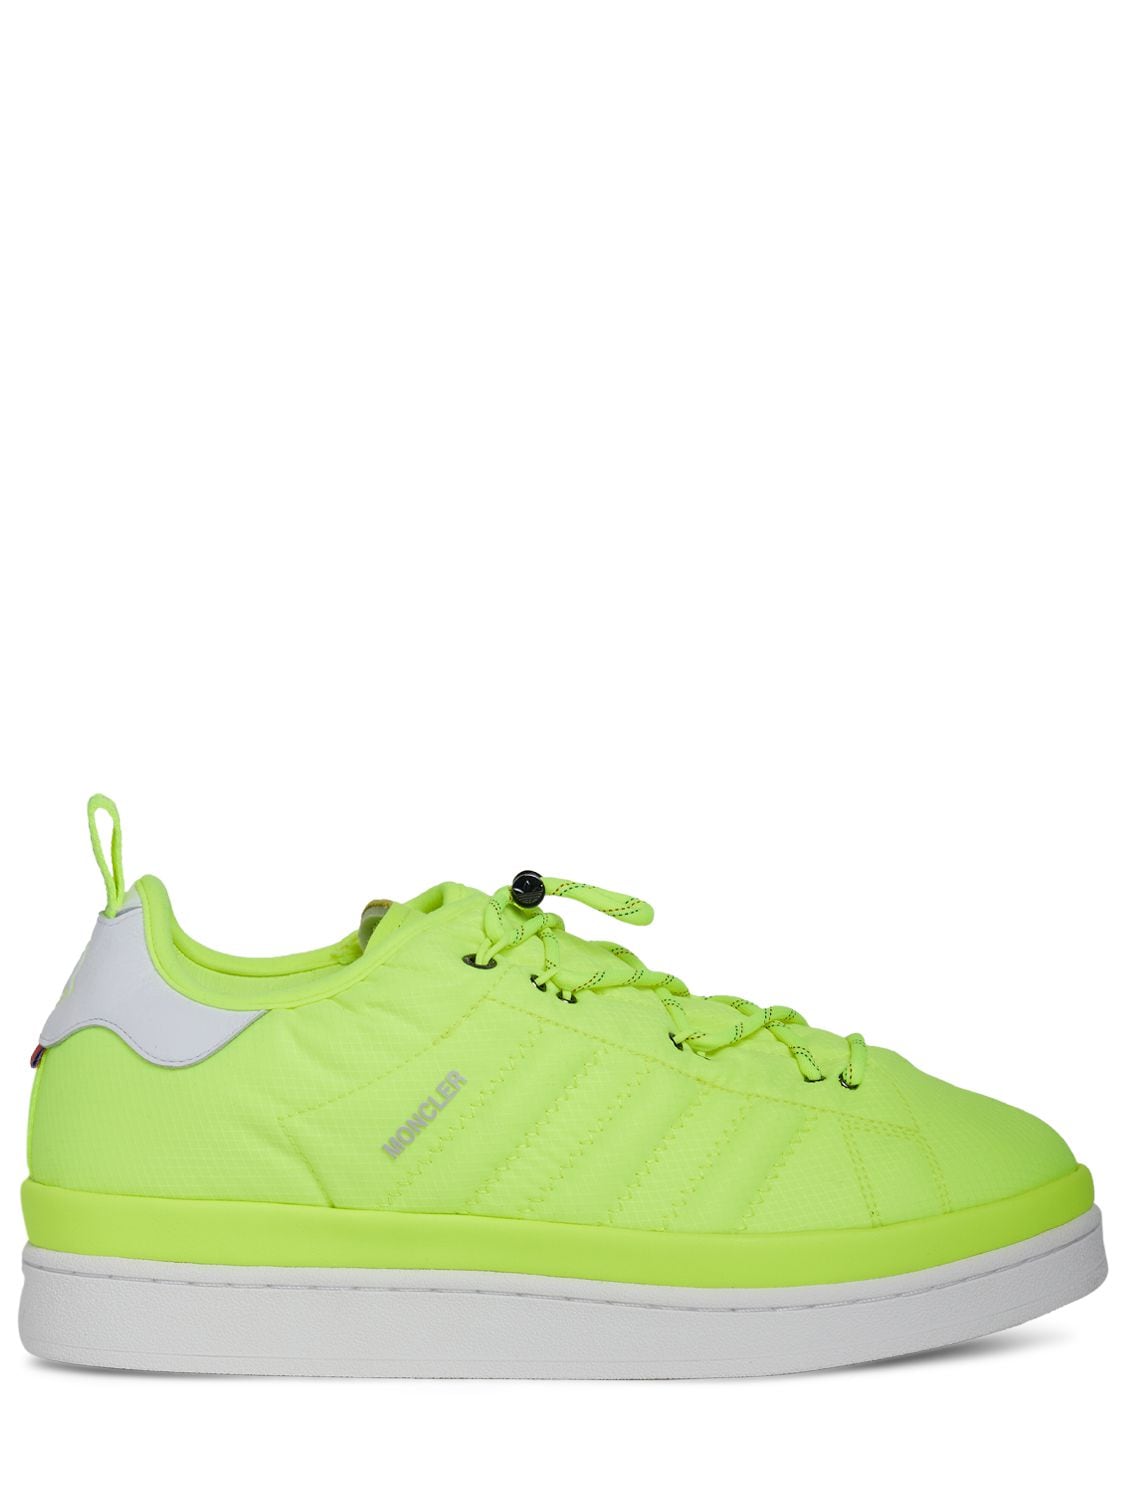 Moncler Genius Moncler X Adidas Campus Leather Sneakers In Bright Yellow